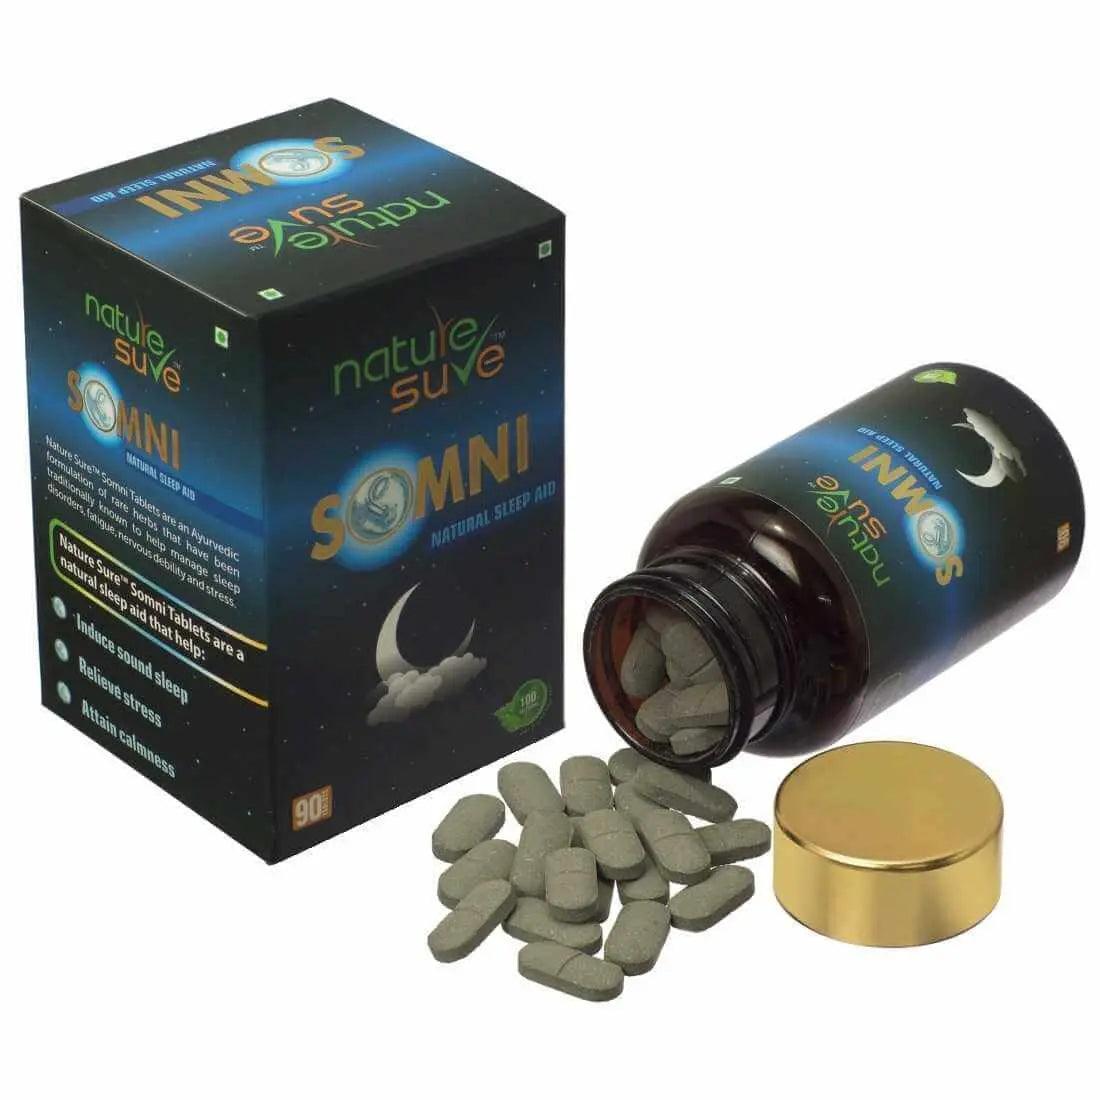 Nature Sure SOMNI Natural Sleep Aid Tablets for Men and Women - 90 Tablets 8906116280010